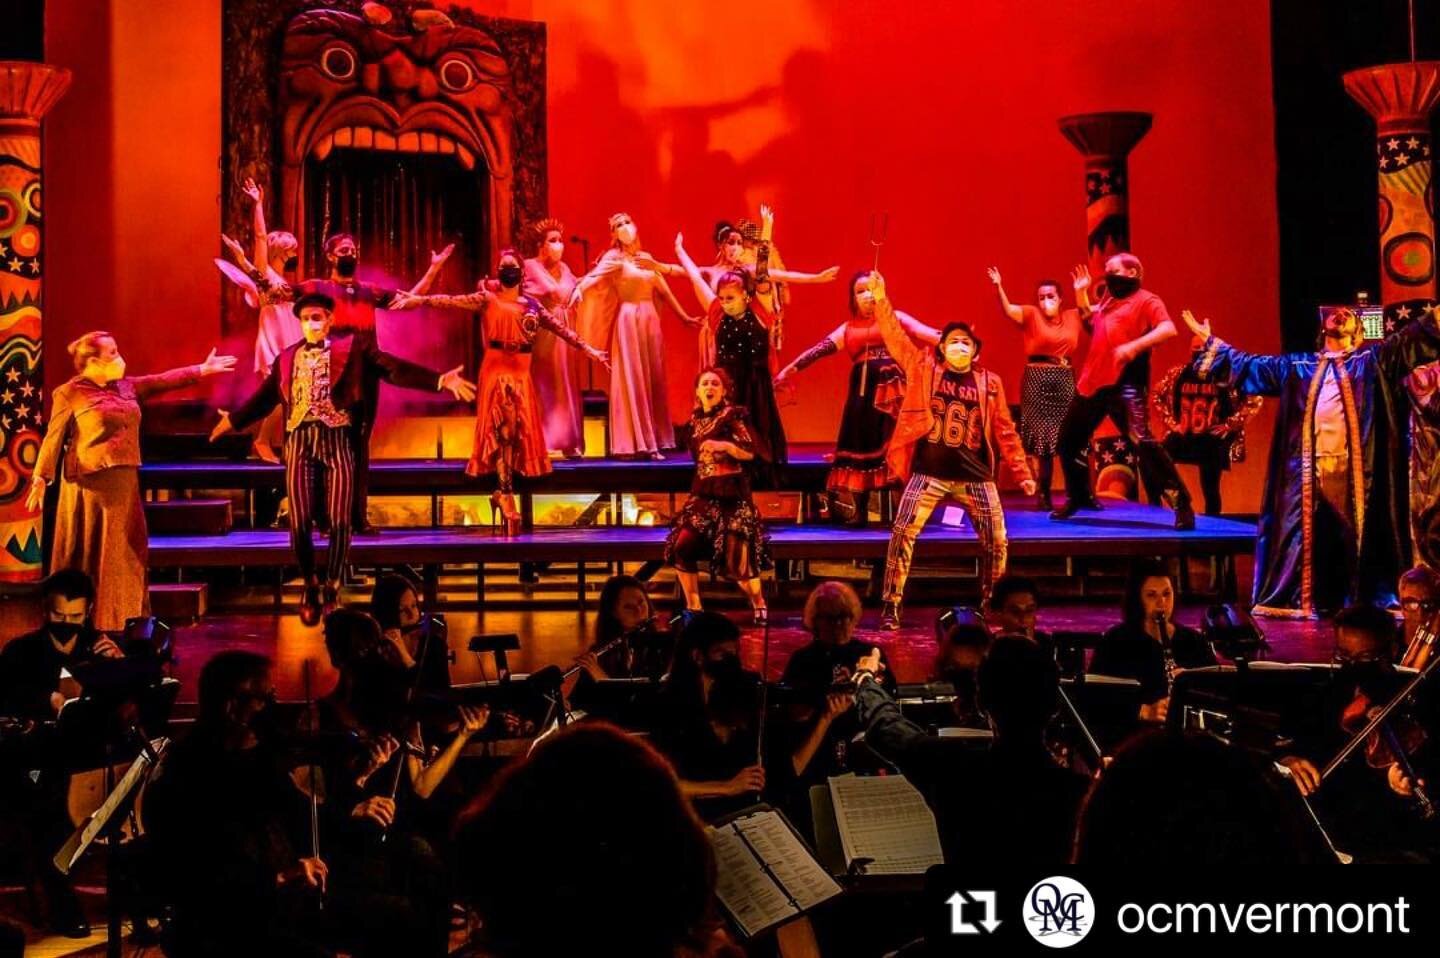 #Repost @ocmvermont 
🔥 💃🏻 🔥 
Orph&eacute;e is open! Playing select dates through June 11. If you're under 26, you get in for free! Next show is tomorrow at 2pm, don&rsquo;t miss it 😈